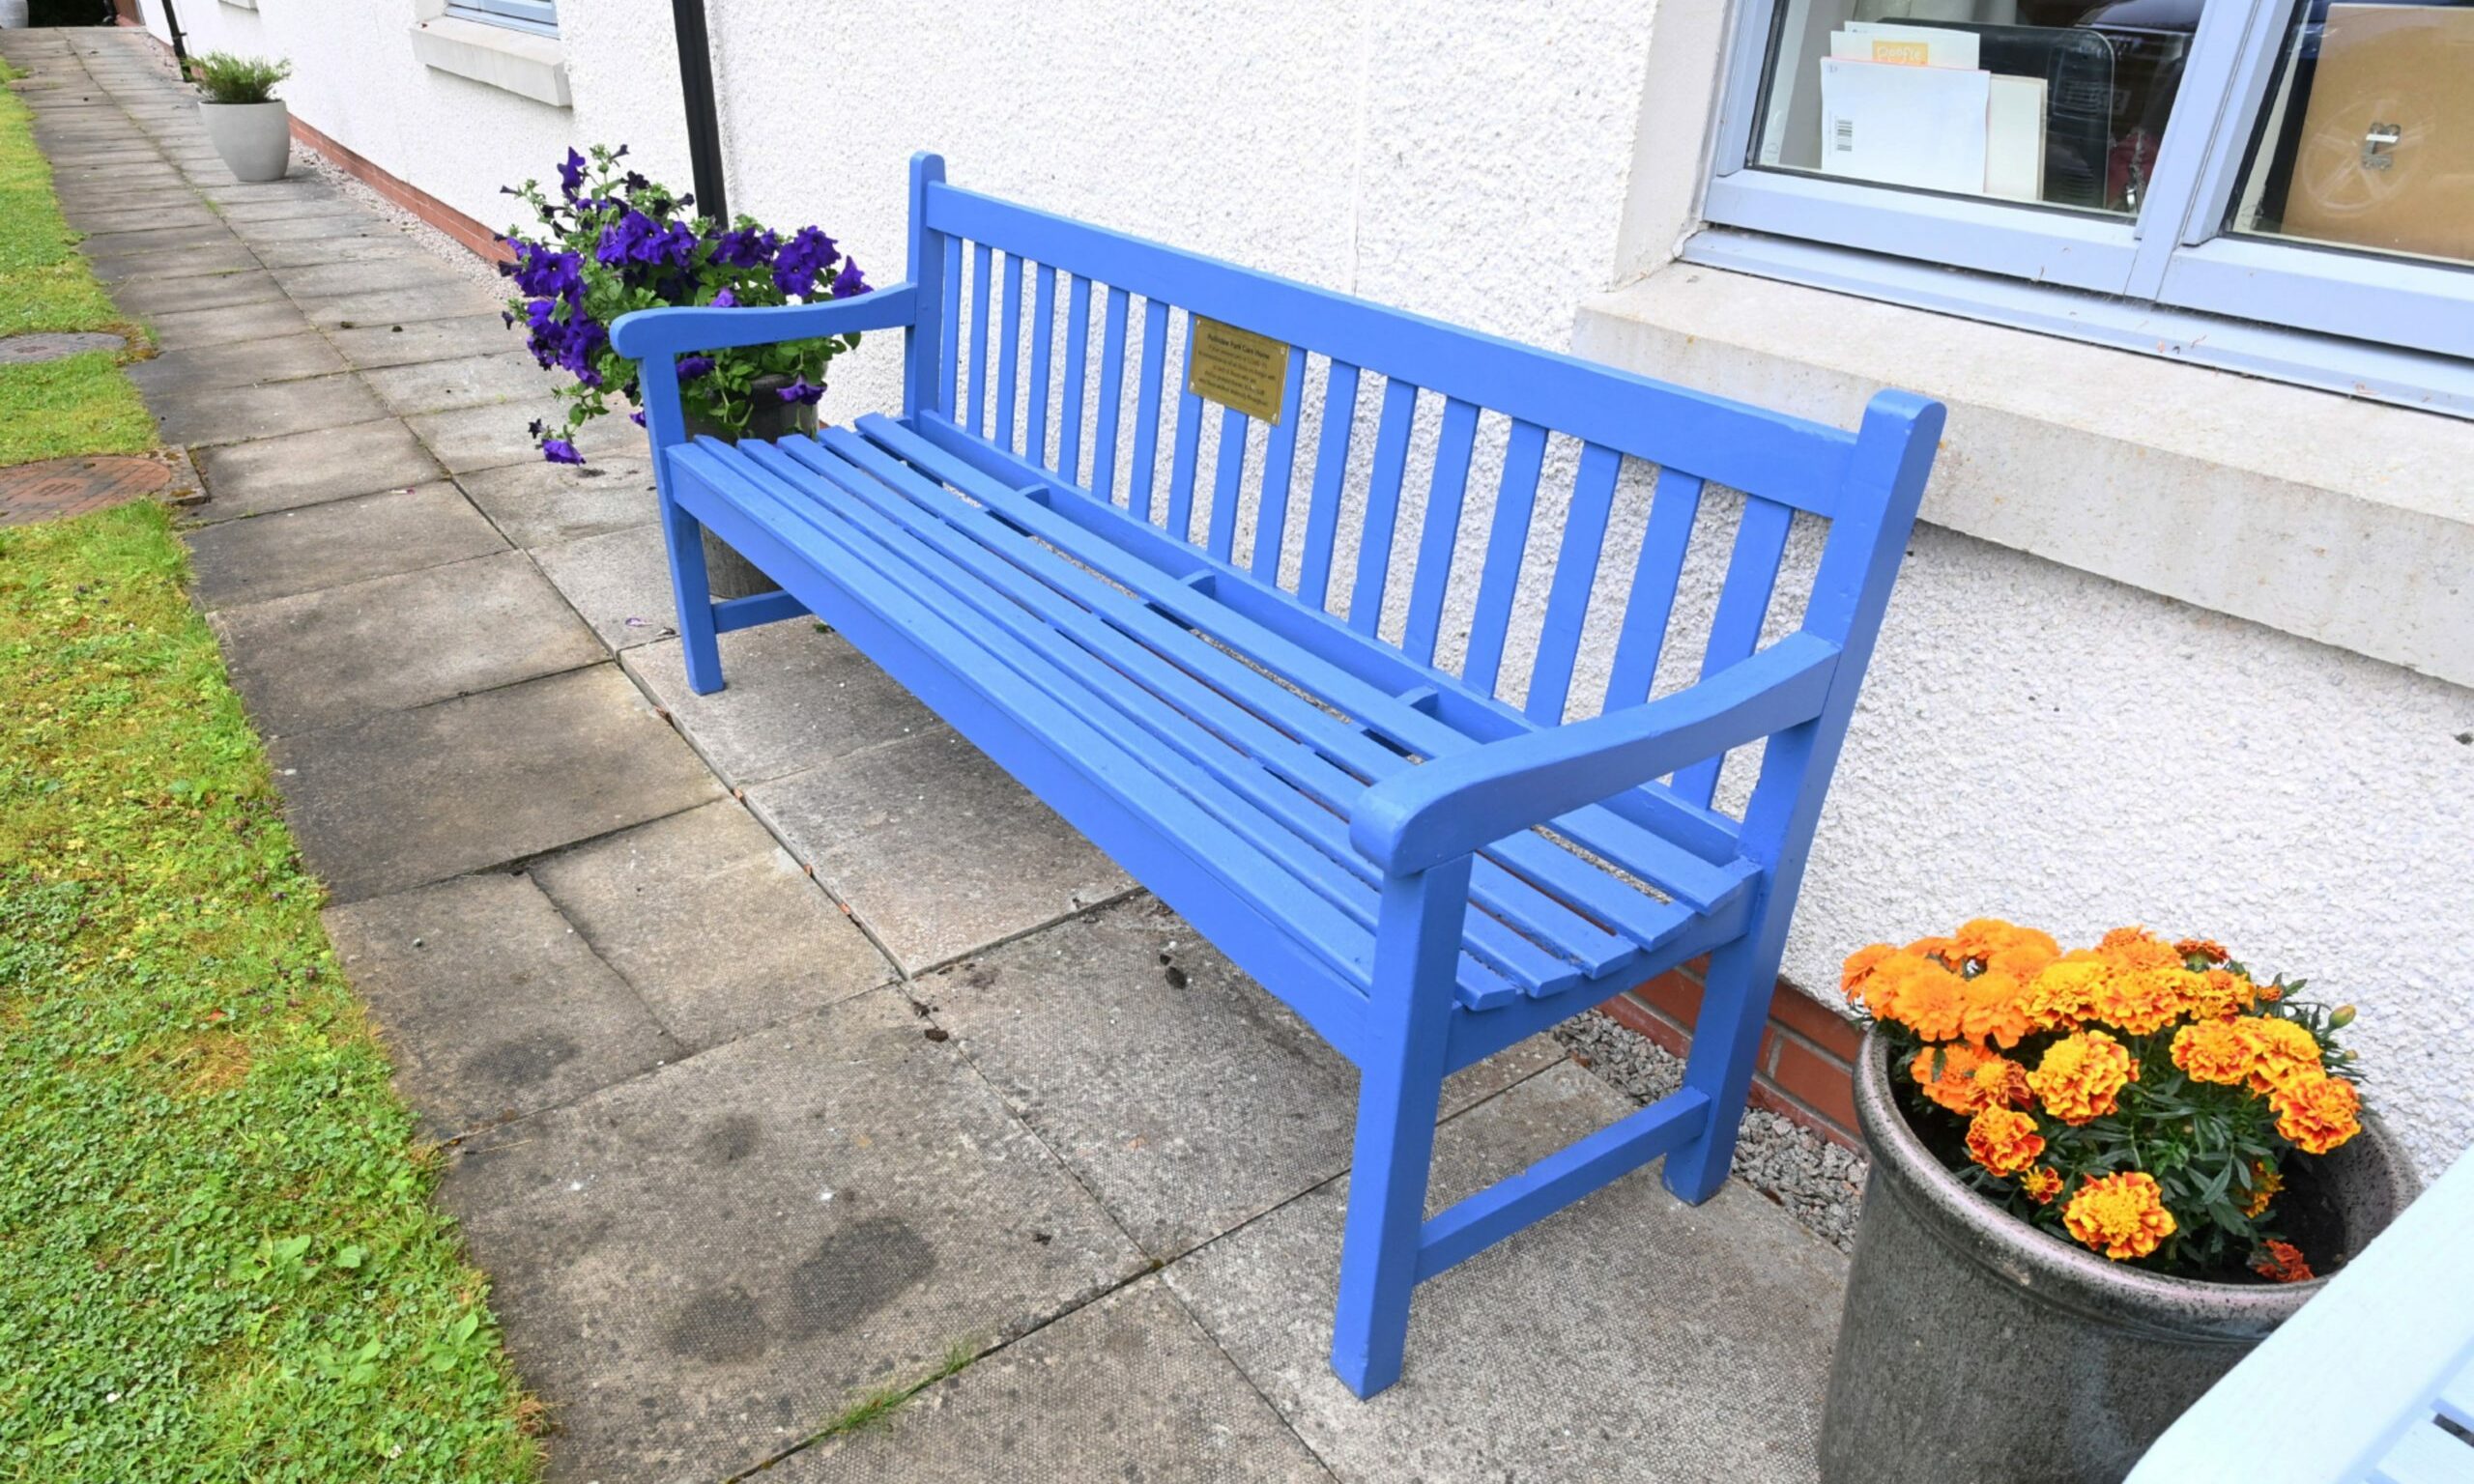 A memorial bench has been dedicated to the staff and residents affected by Covid-19. Picture by Chris Sumner.